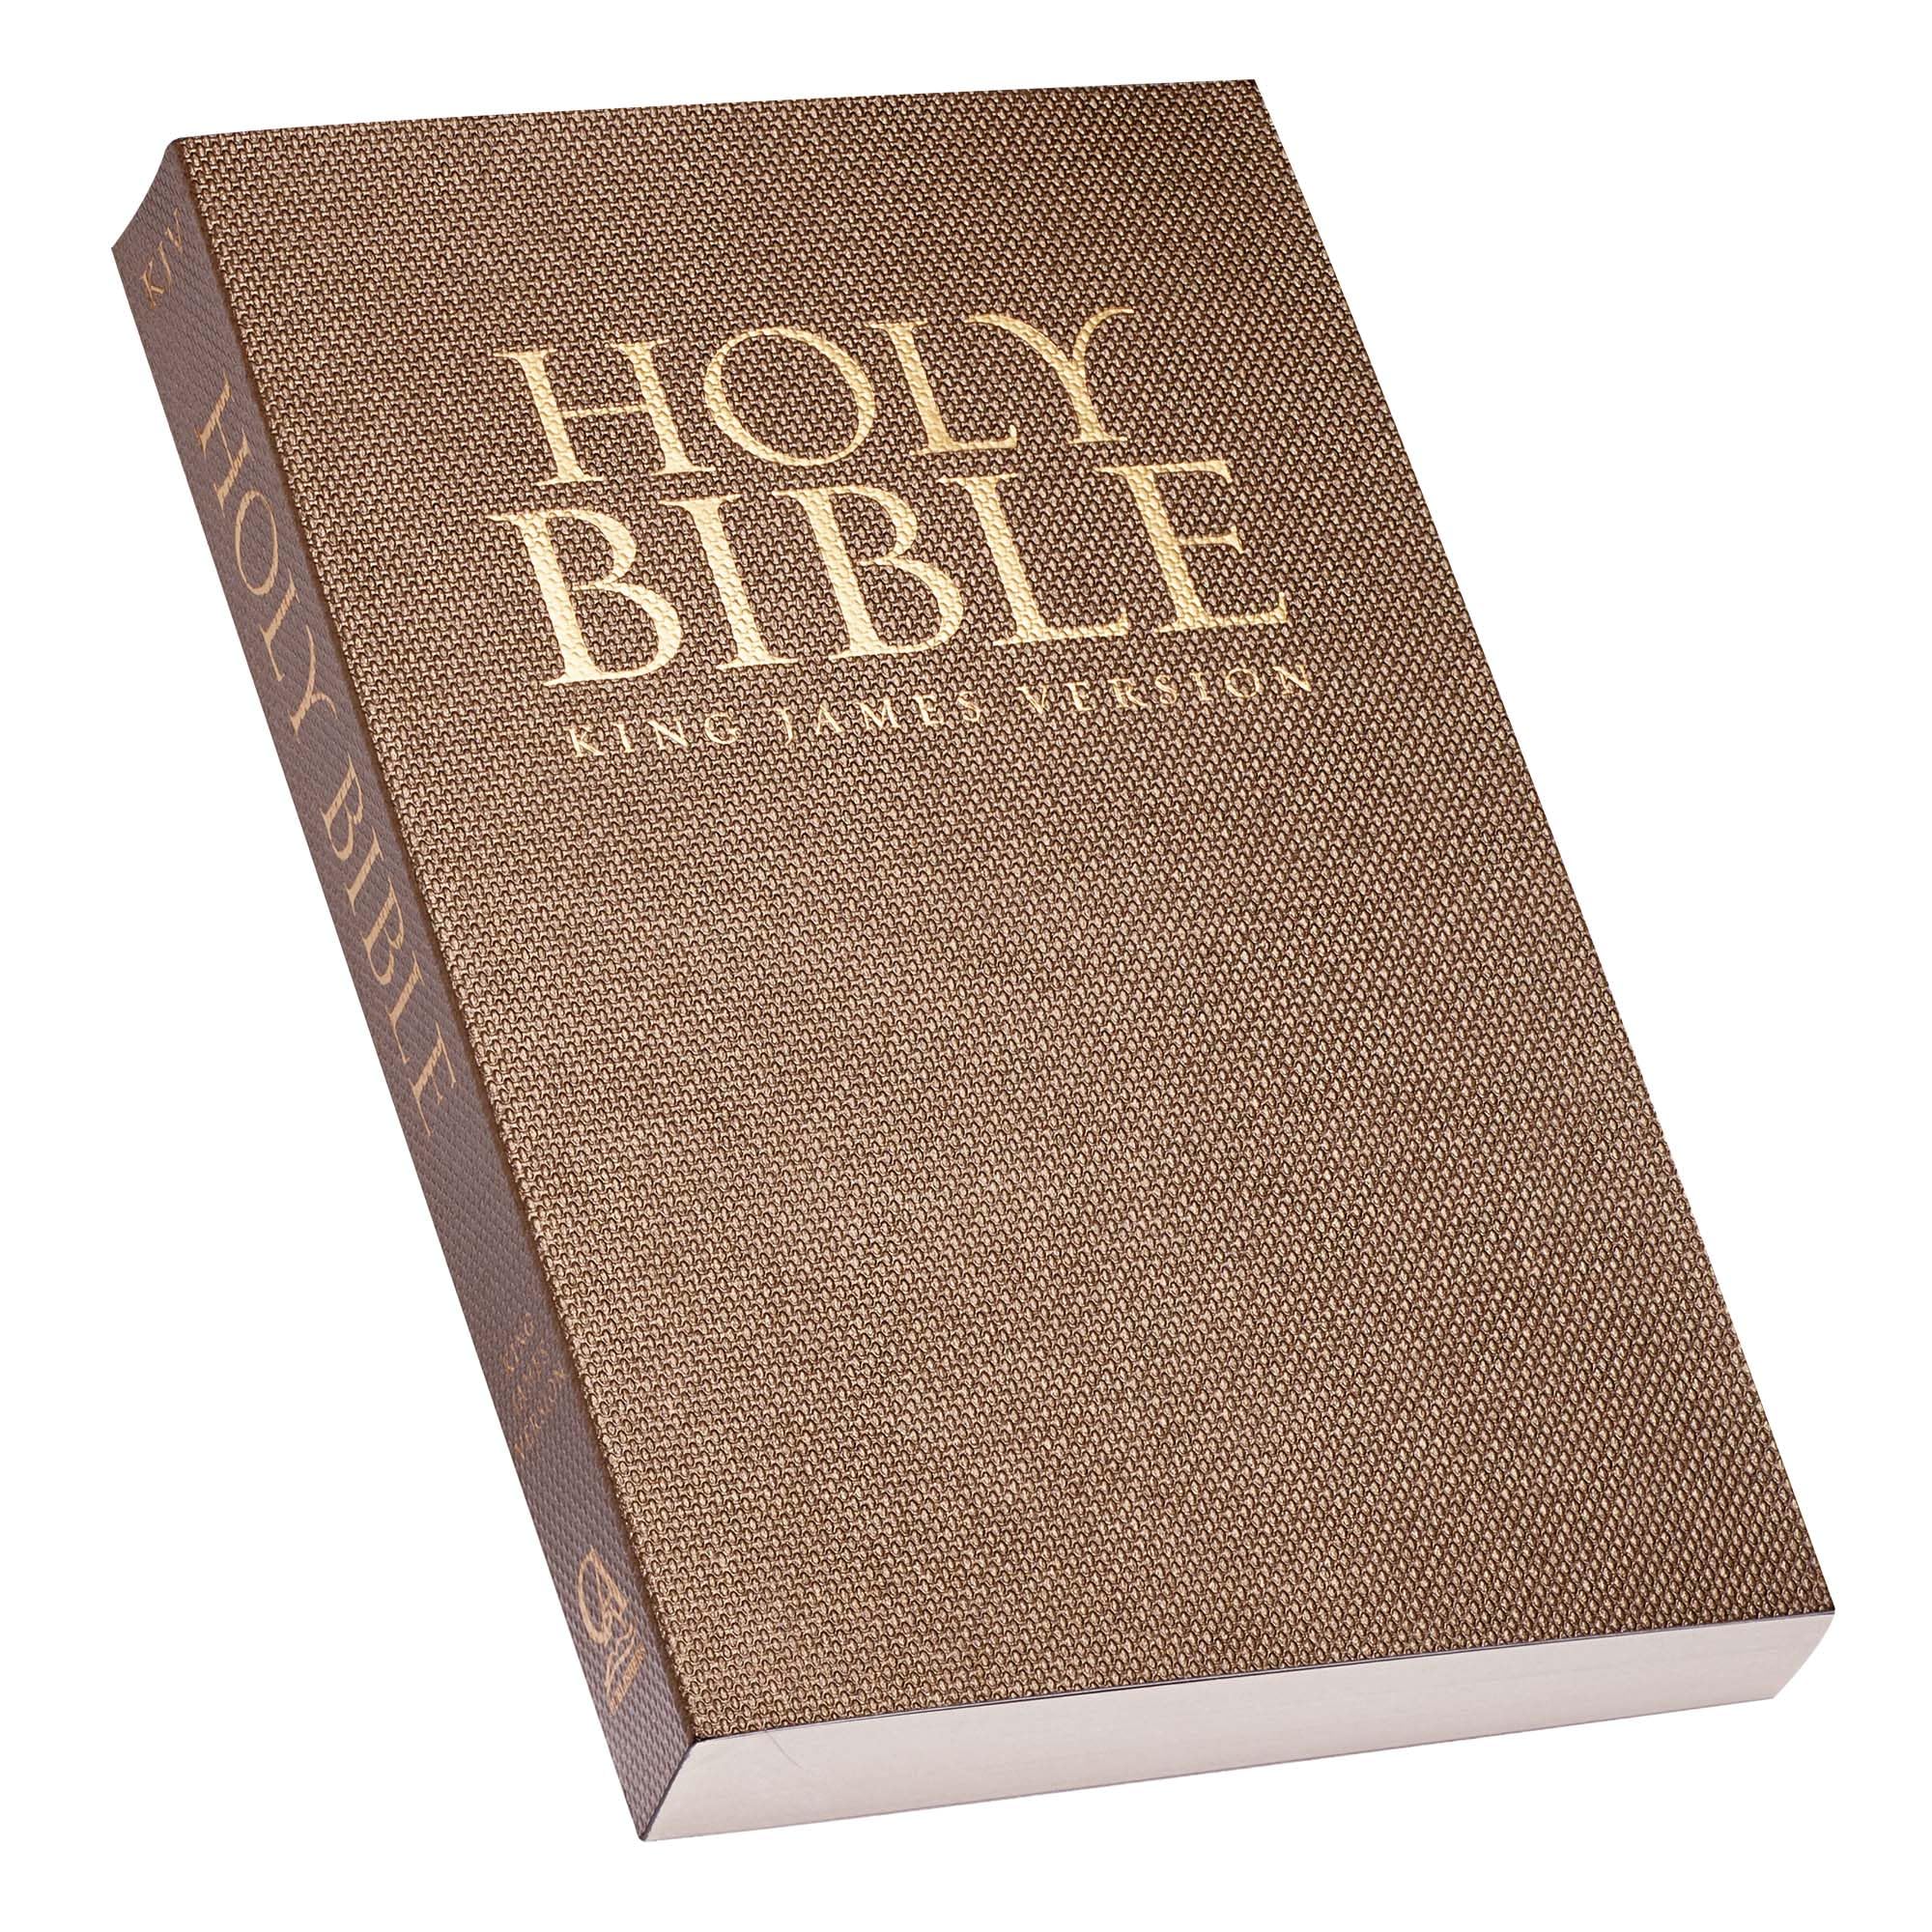 KJV Holy Bible, Gift and Award Bible - Softcover, King James Version, Antique Gold